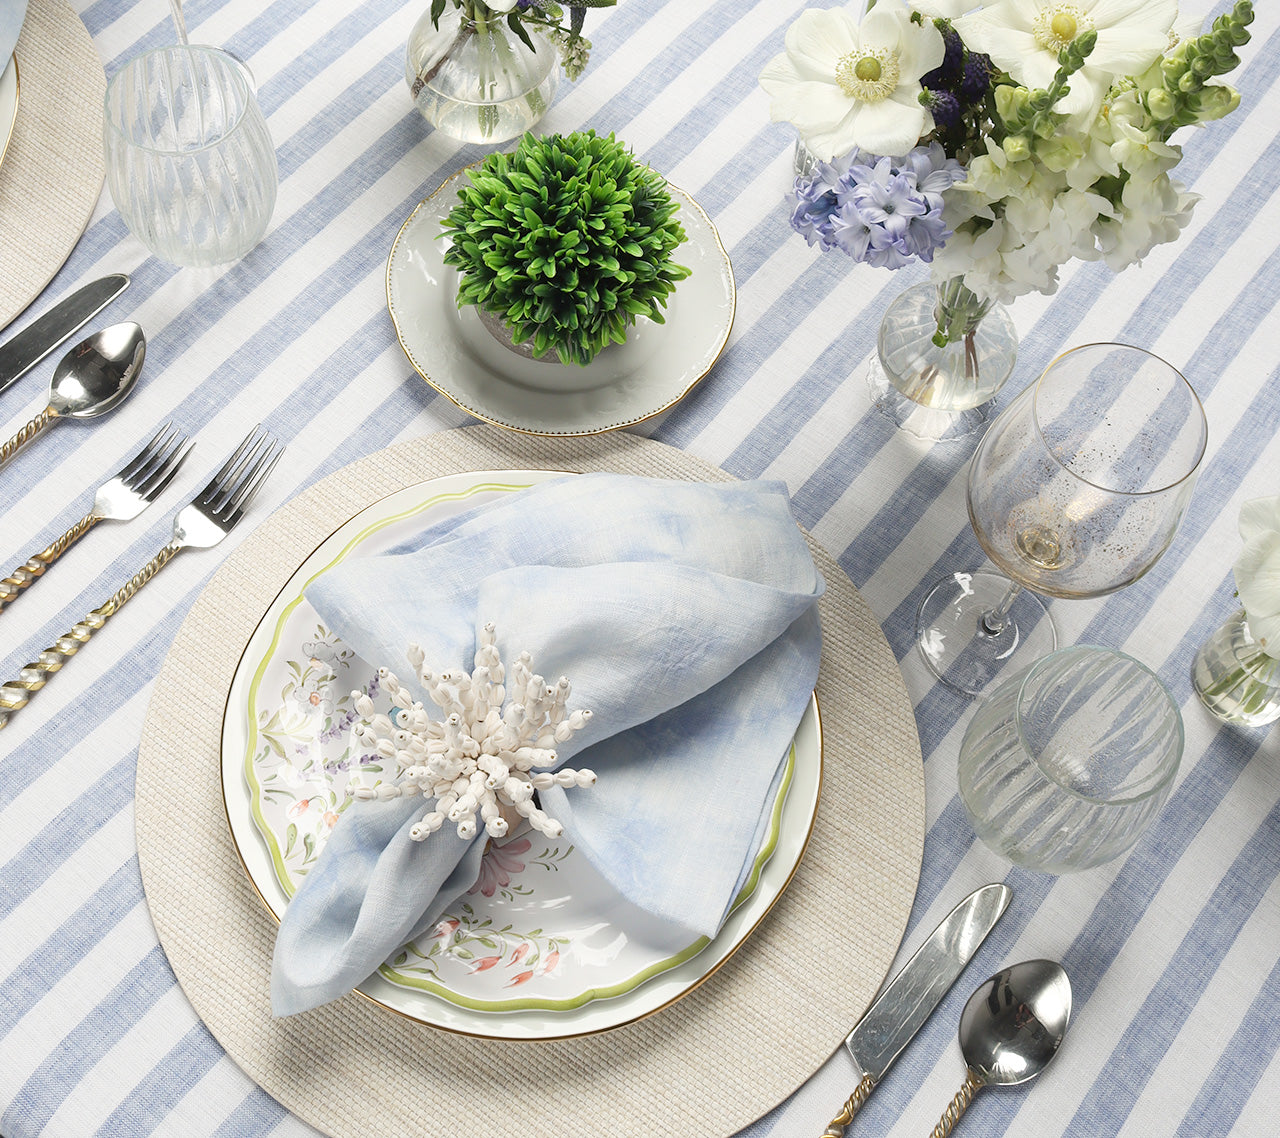 Table set with blue-and-white striped tablecloth, natural-color placemat and a periwinkle Cloud Napkin 